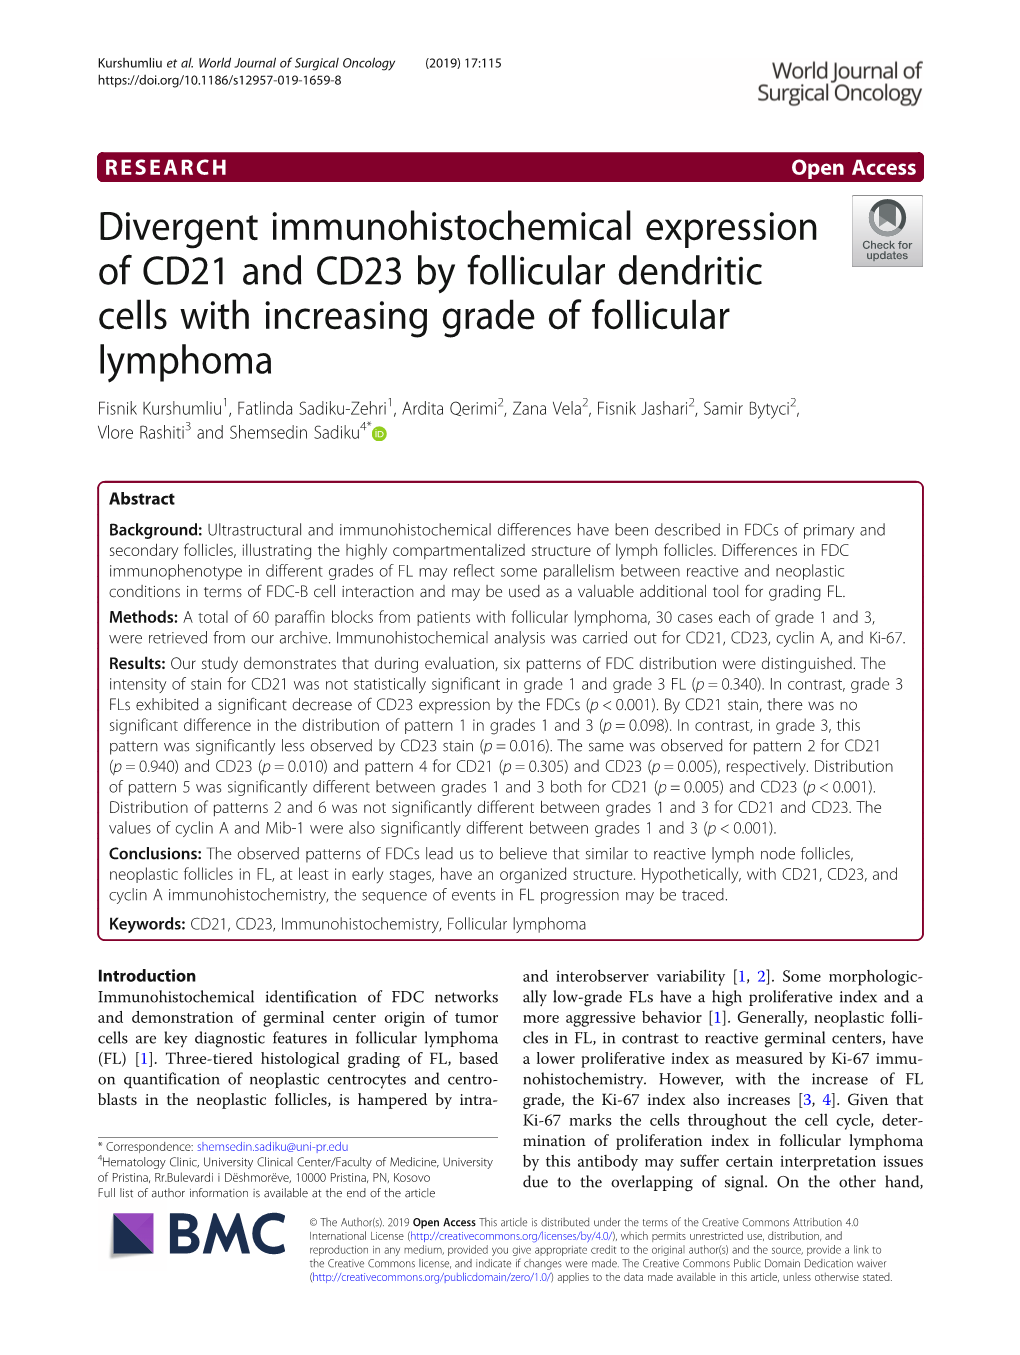 Divergent Immunohistochemical Expression of CD21 and CD23 By